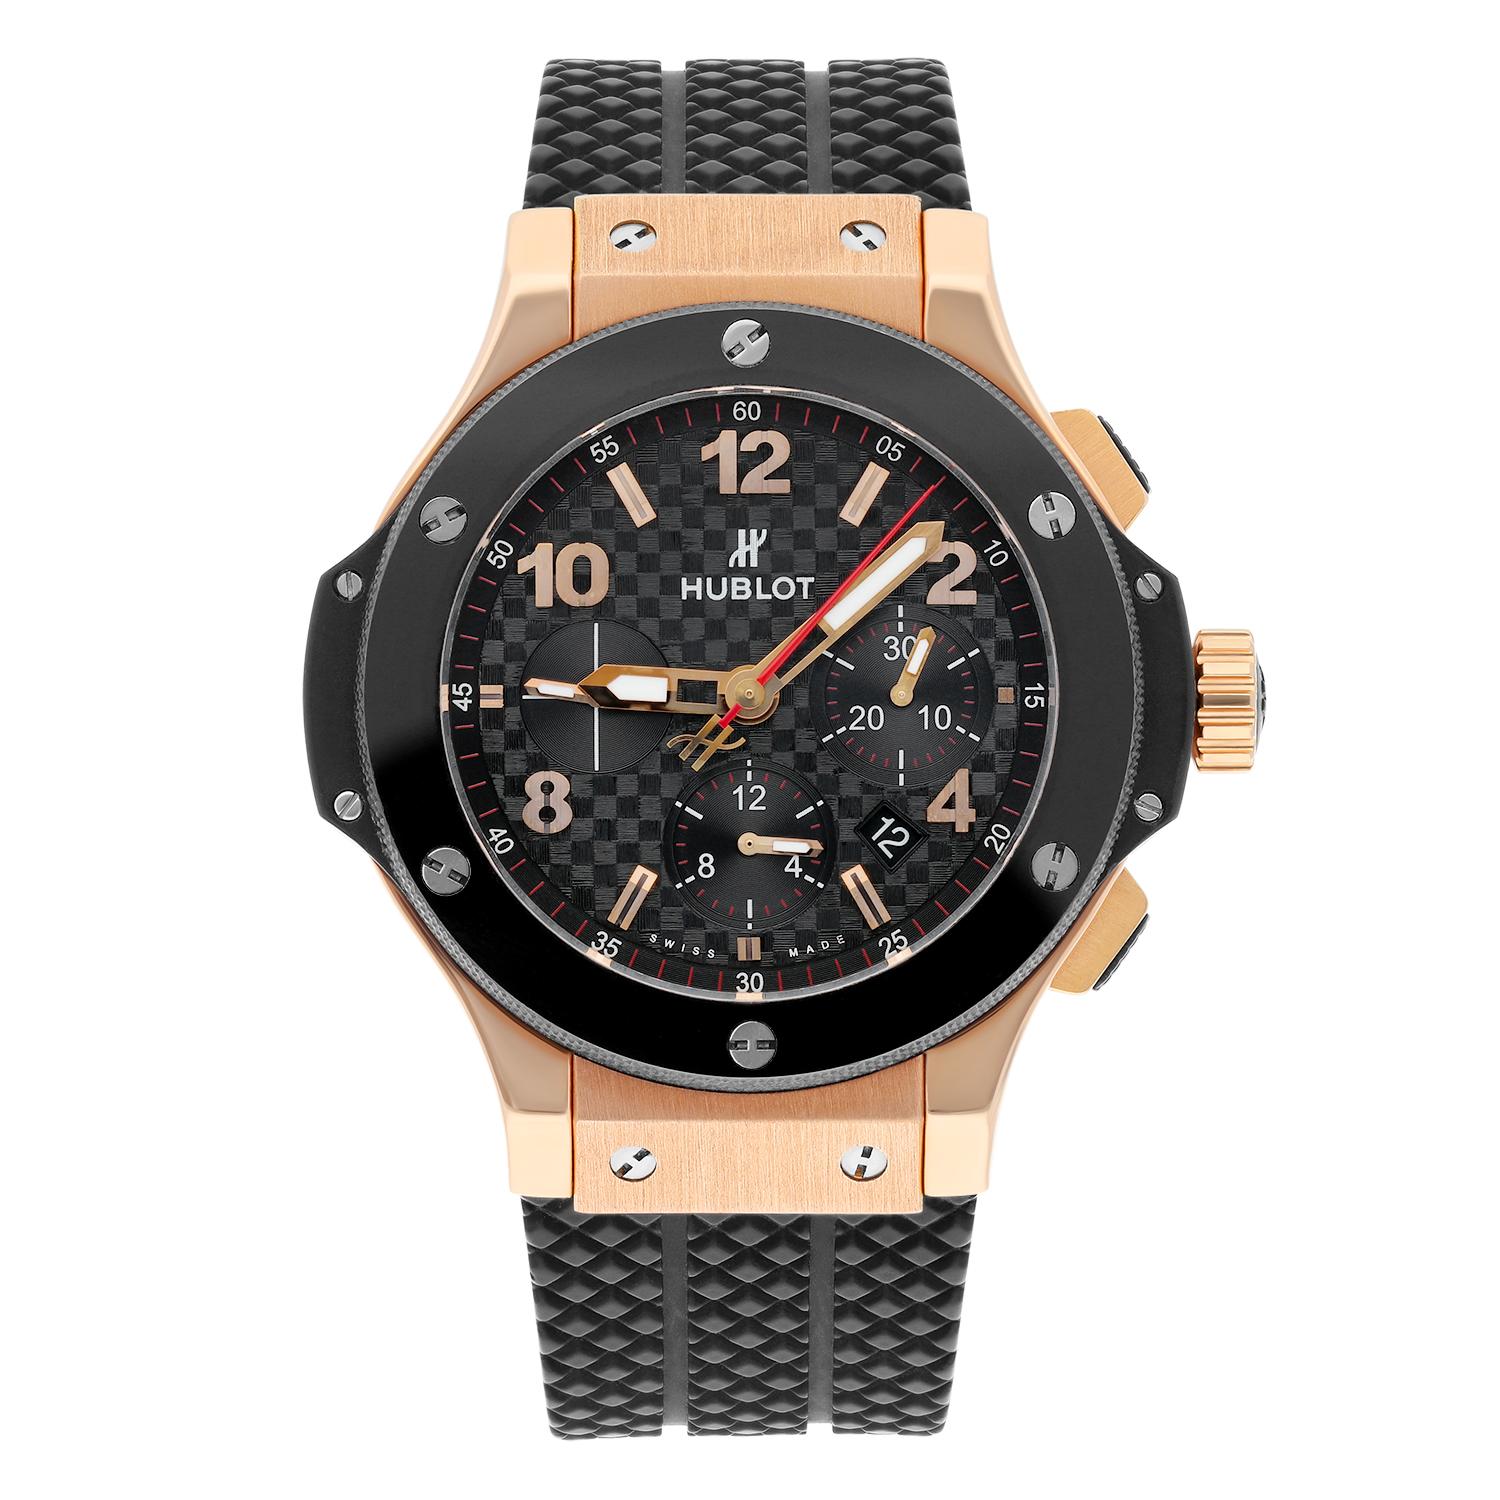 18kt rose gold case with a black rubber strap. Fixed black ceramic bezel. Black carbon fiber dial with luminous hands and alternating Arabic numeral and index hour markers. Minute markers around the outer rim. Dial Type: Analog. Luminescent hands